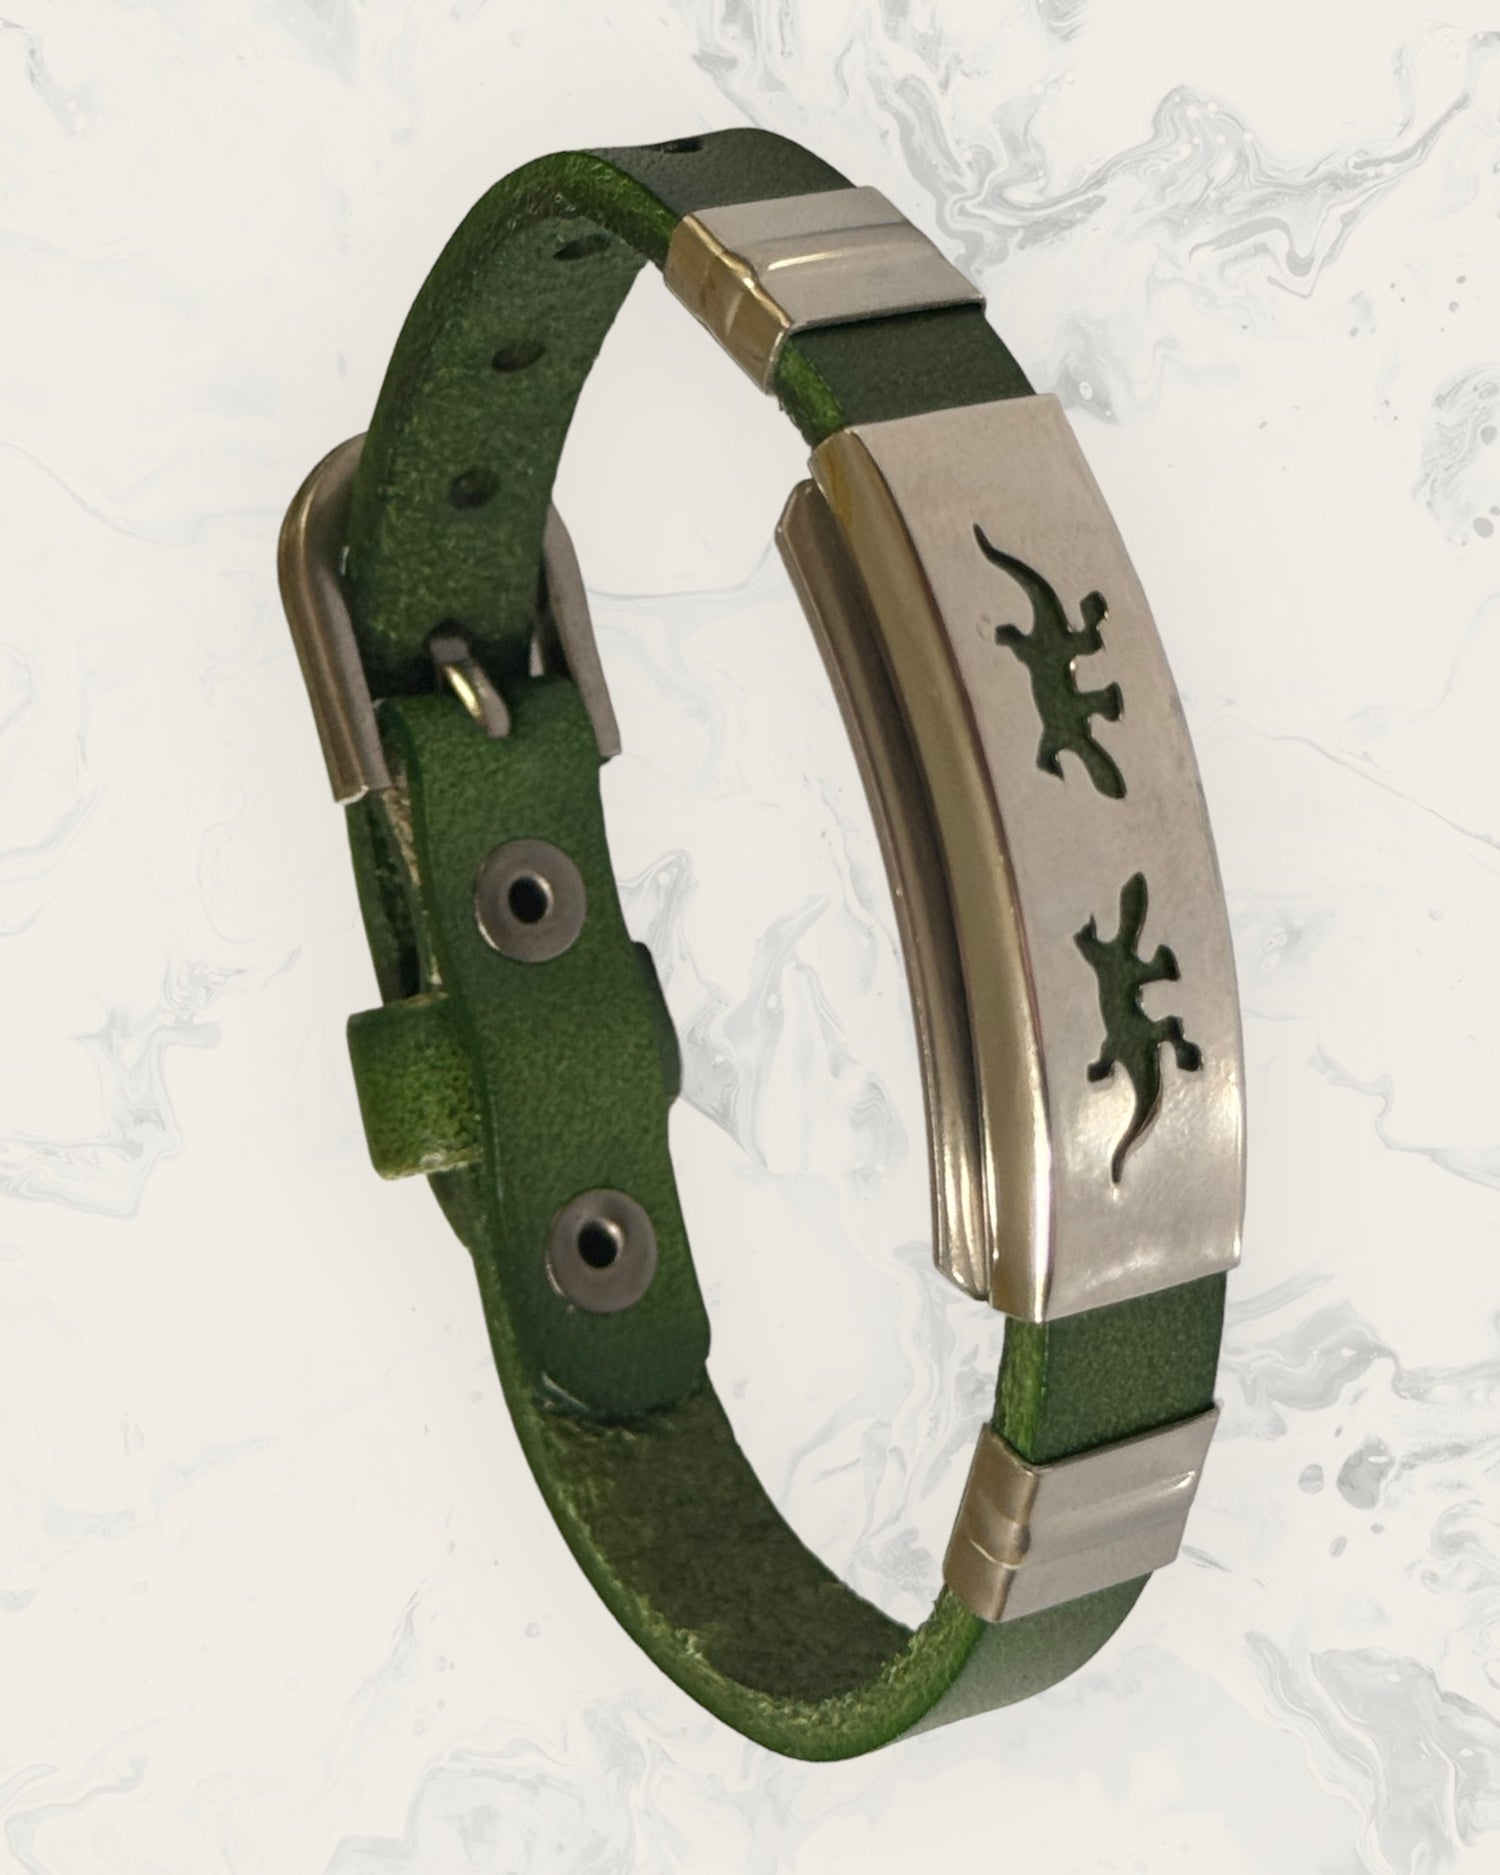 Frequency Jewelry Natural Pain Relief and EMF Protection Bracelet Leather Band Color Green with Two Geckos design on a silver metal slider